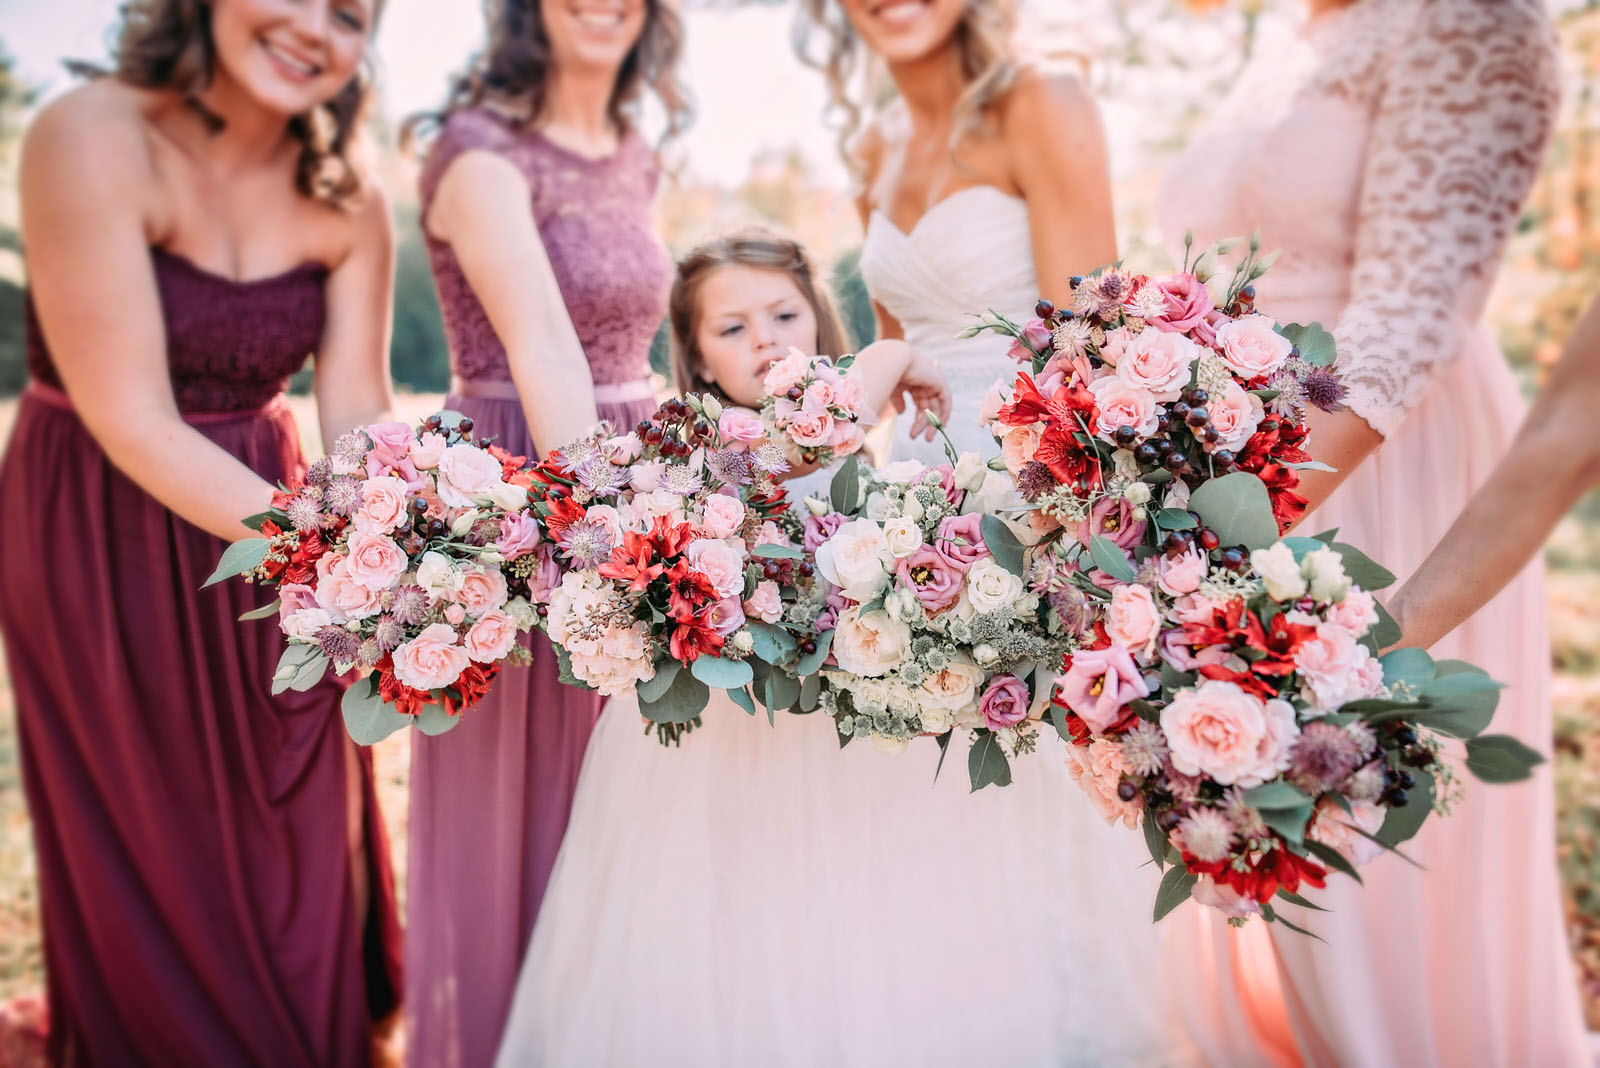 Bridesmaids and bouquets